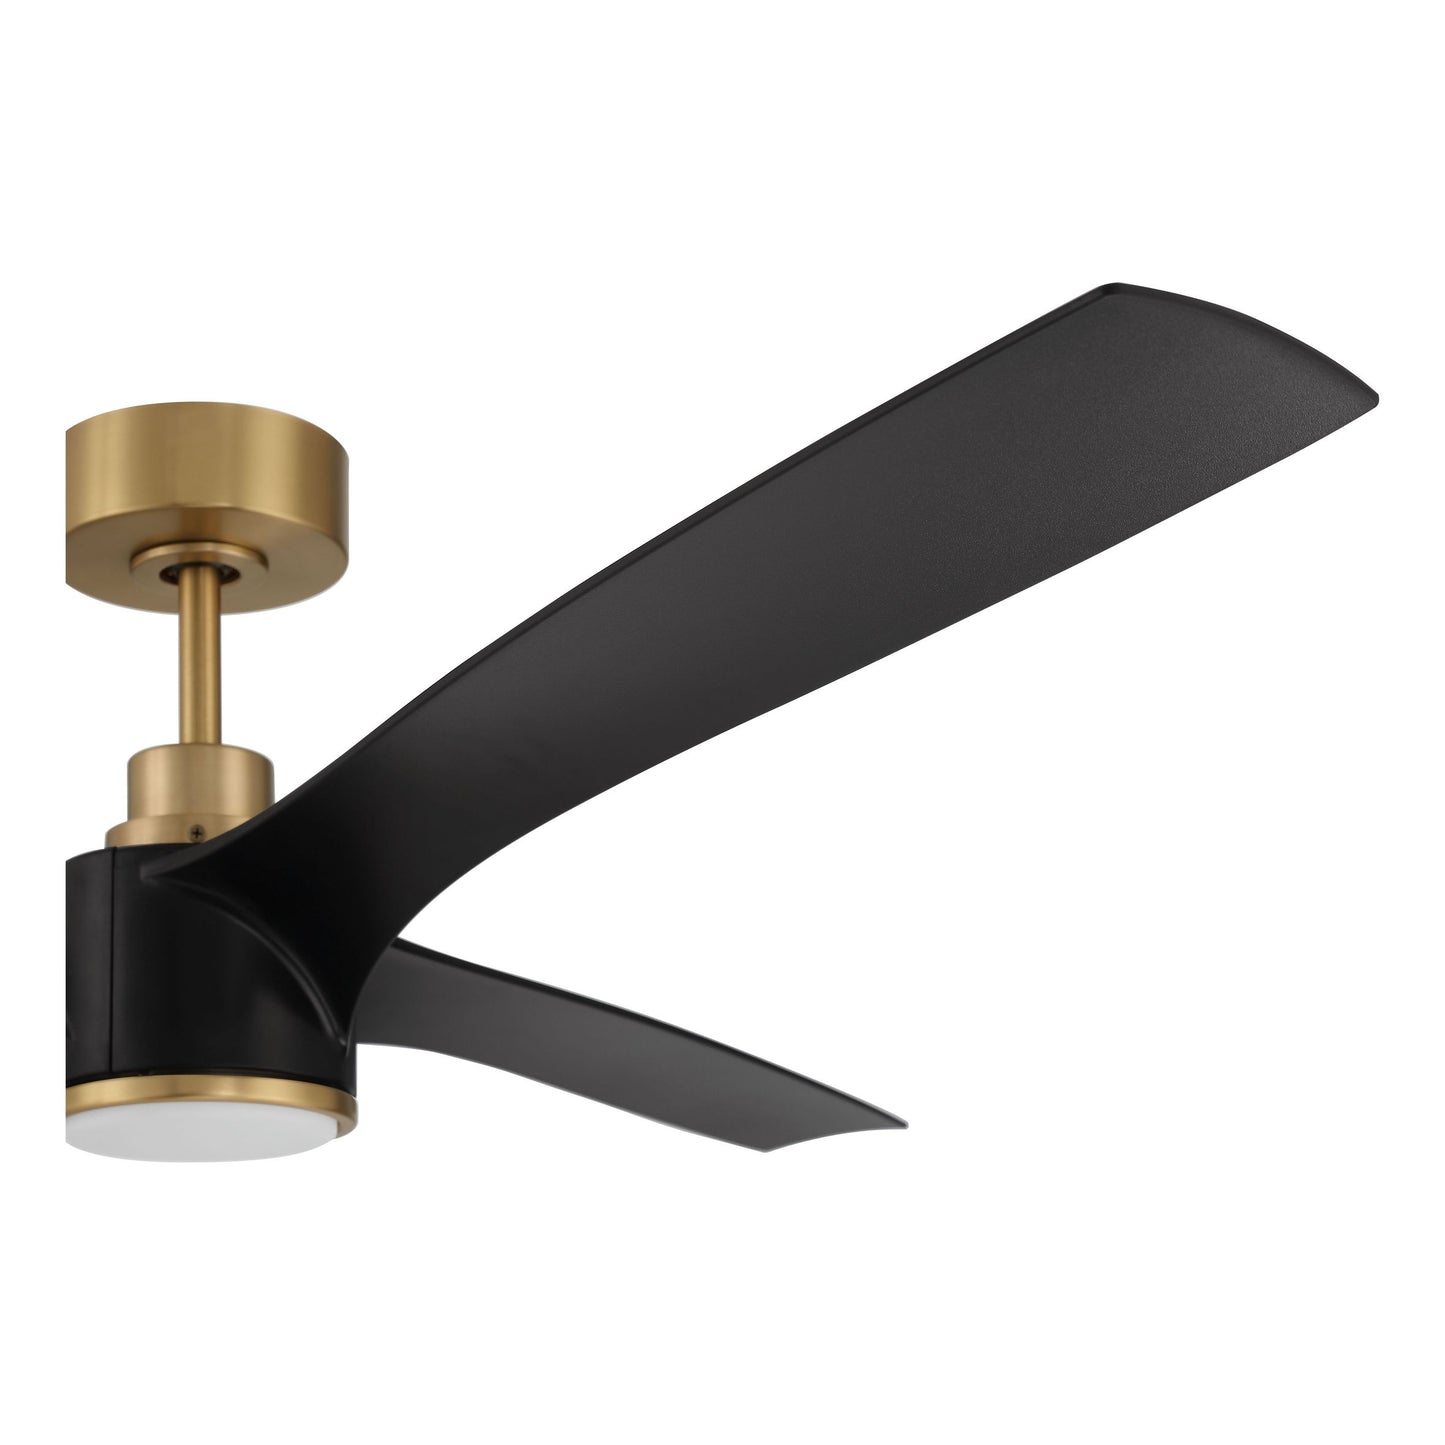 PHB60FBSB3 - Phoebe 60" 3 Blade Indoor / Outdoor Ceiling Fan with Light Kit - Wi-Fi Remote Control -